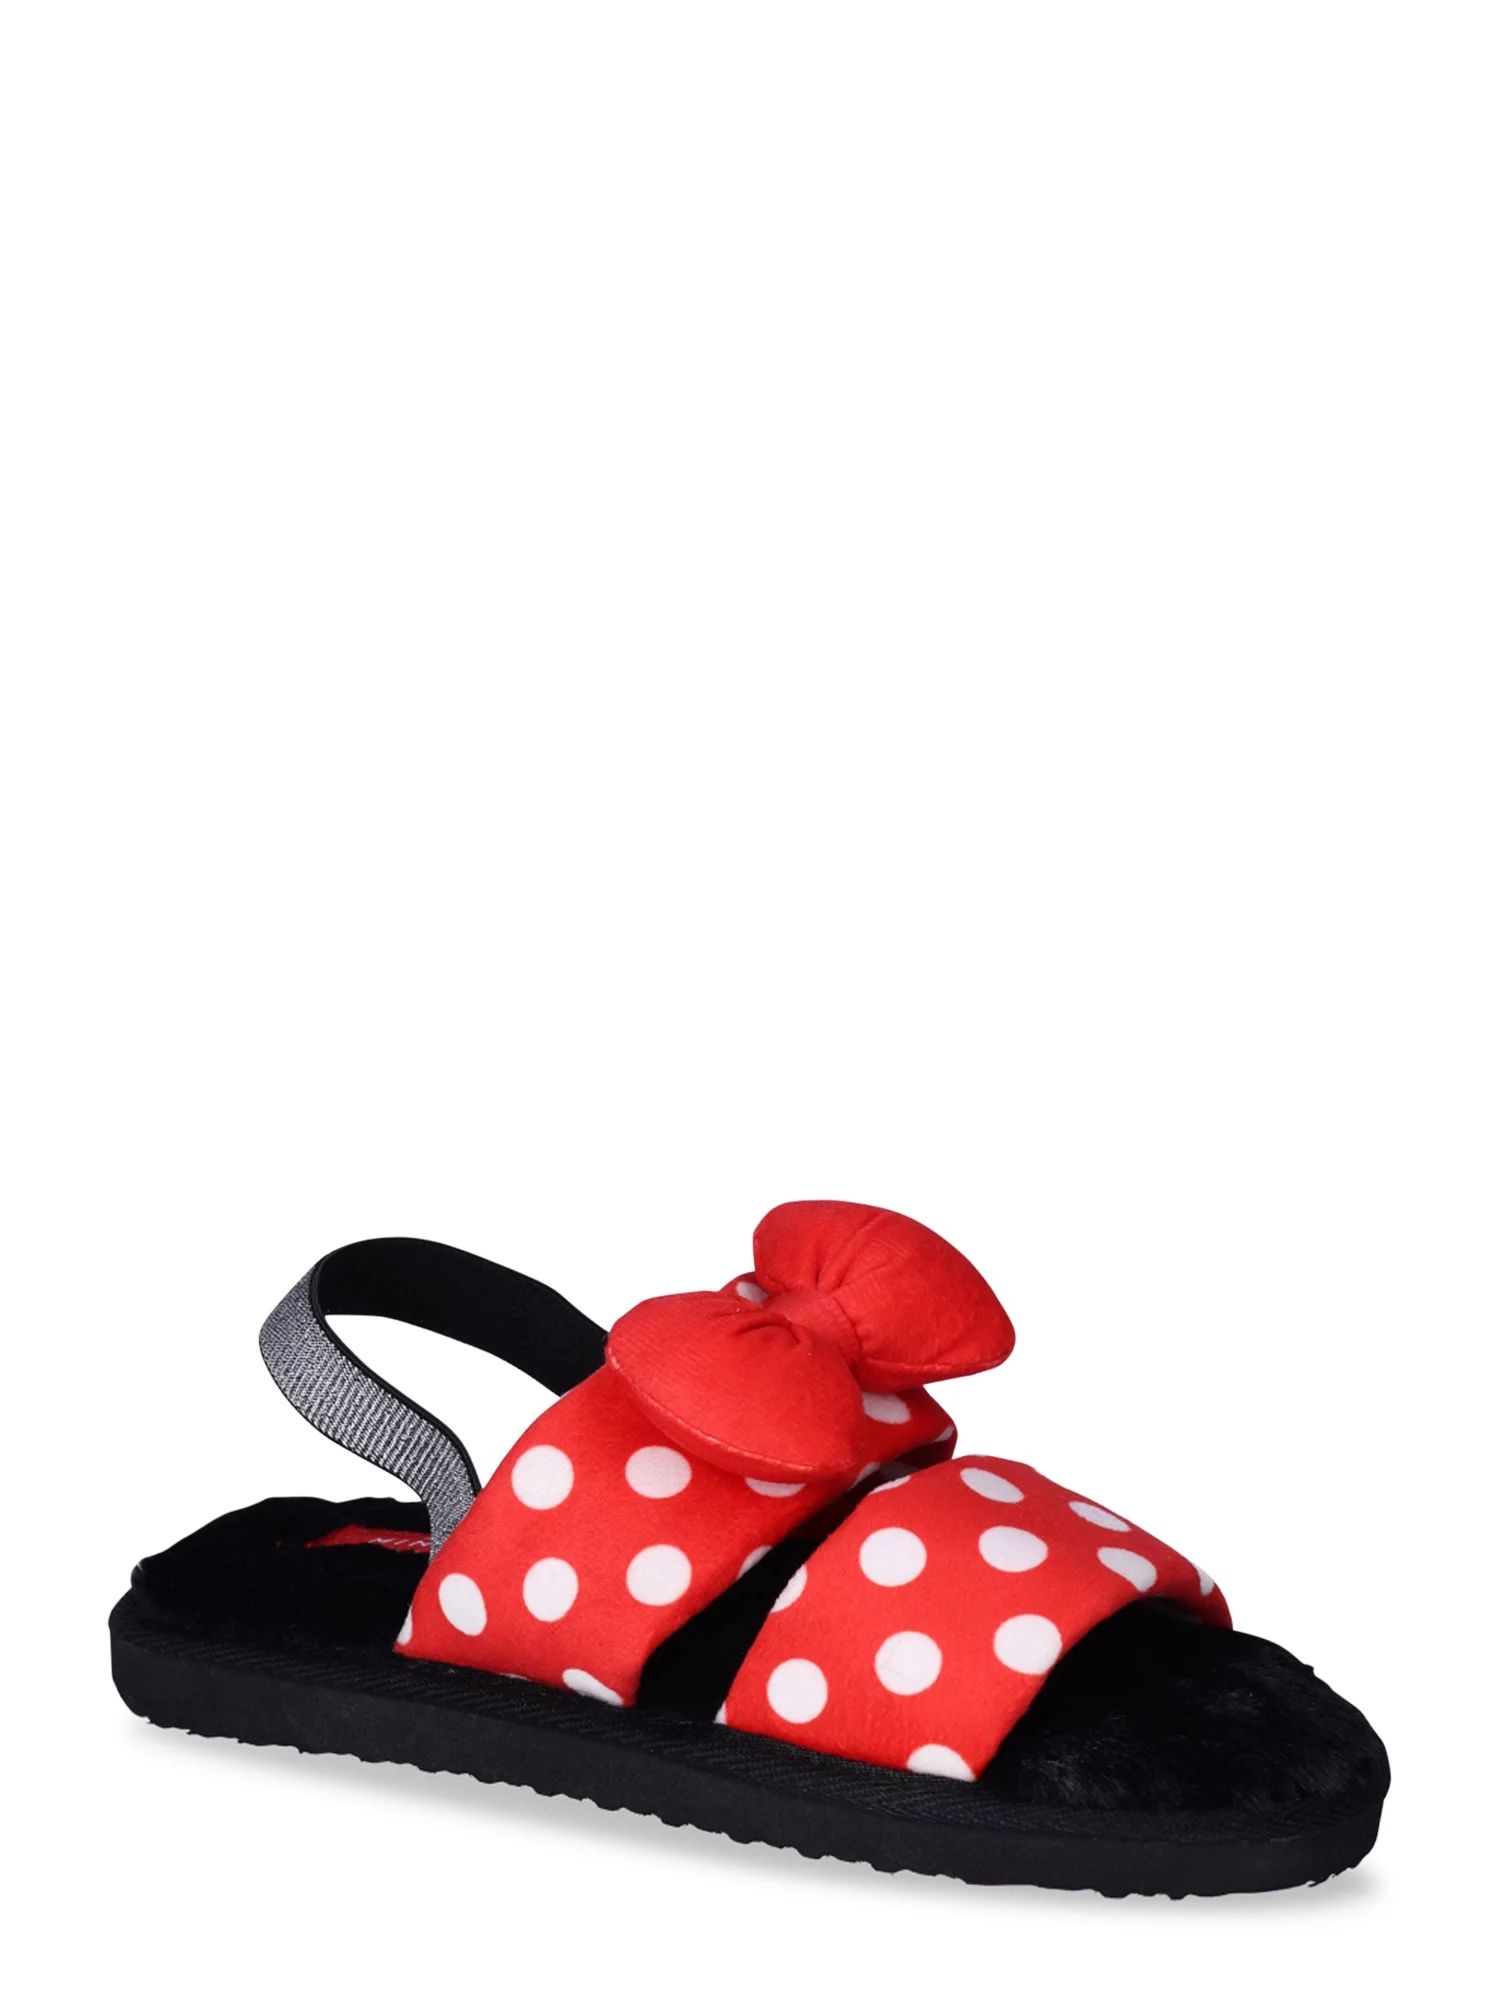 Disney Minnie Mouse Women’s Double Band Slippers, Sizes 6-11 | Walmart (US)